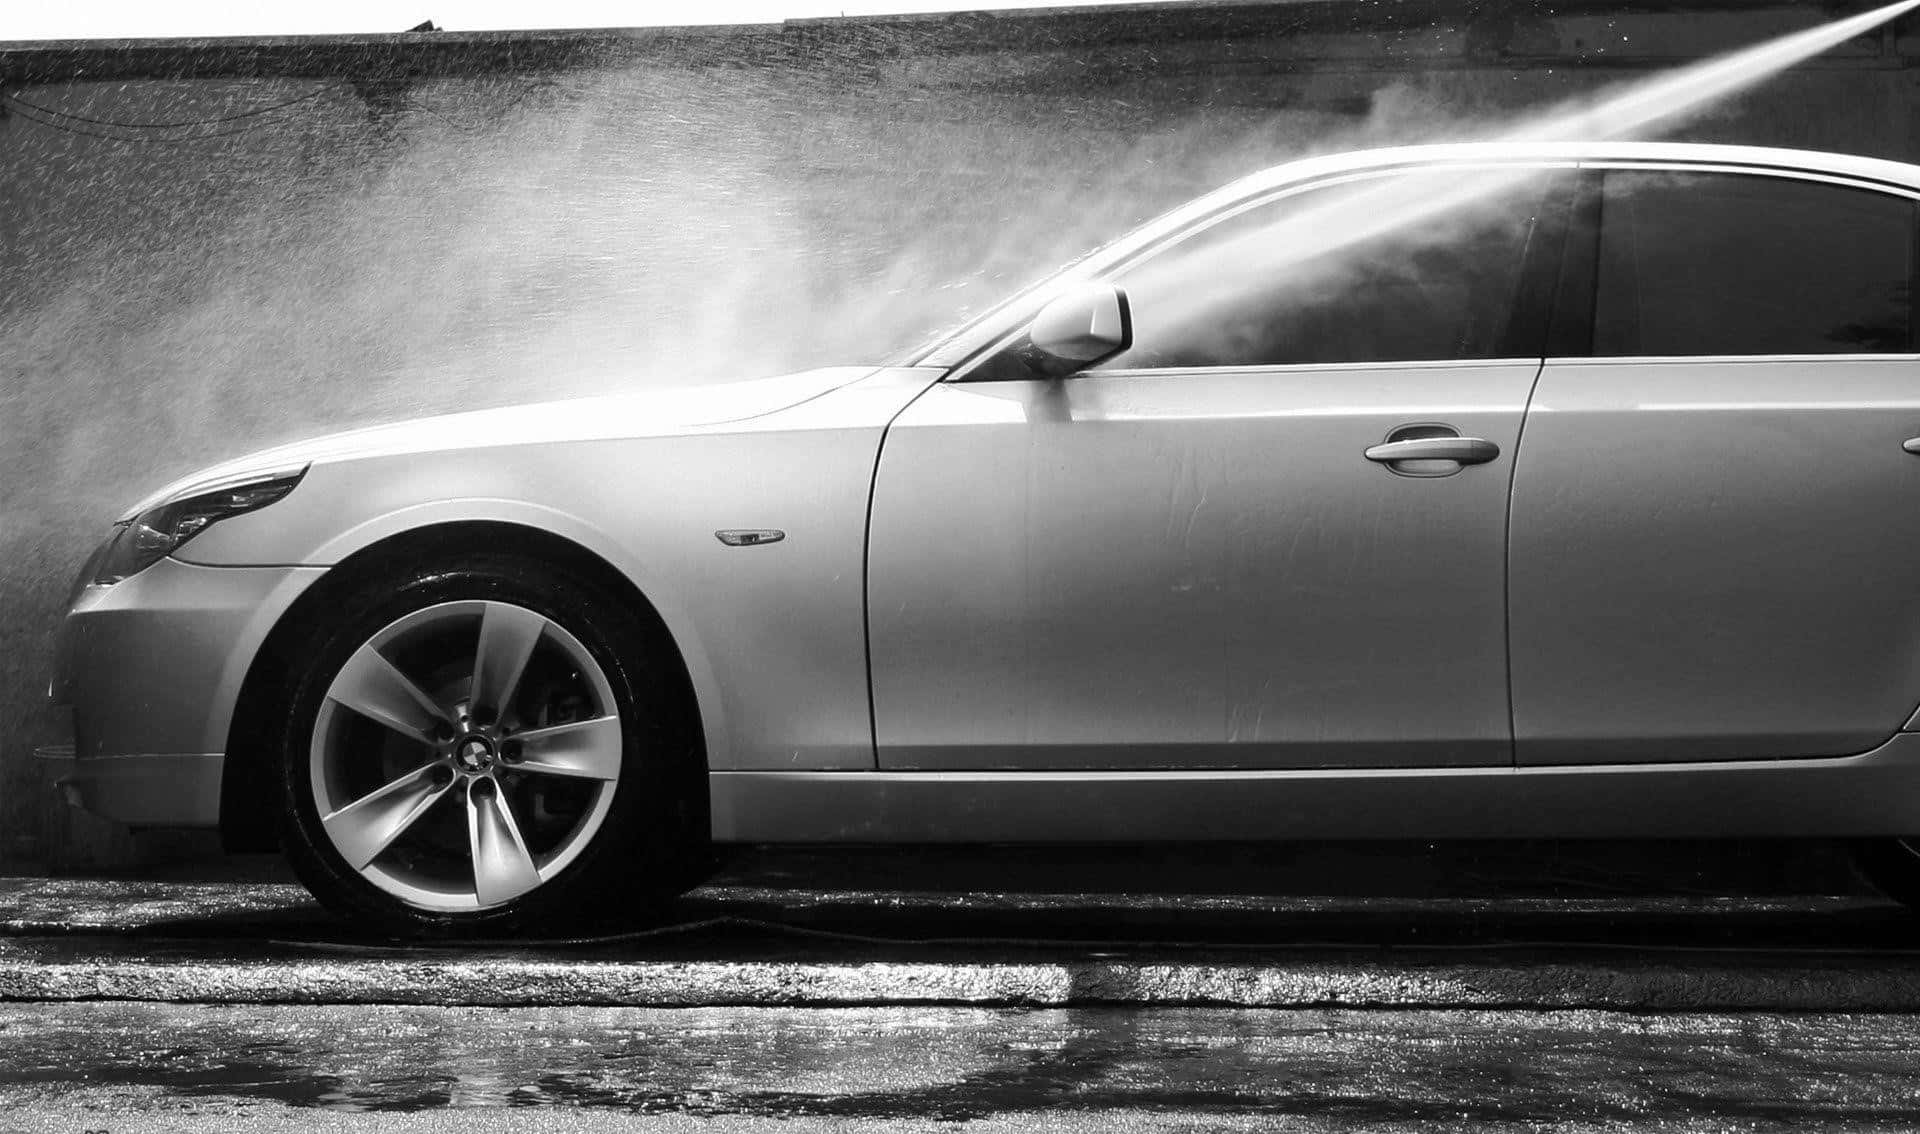 Get that car shining with a professional car wash!